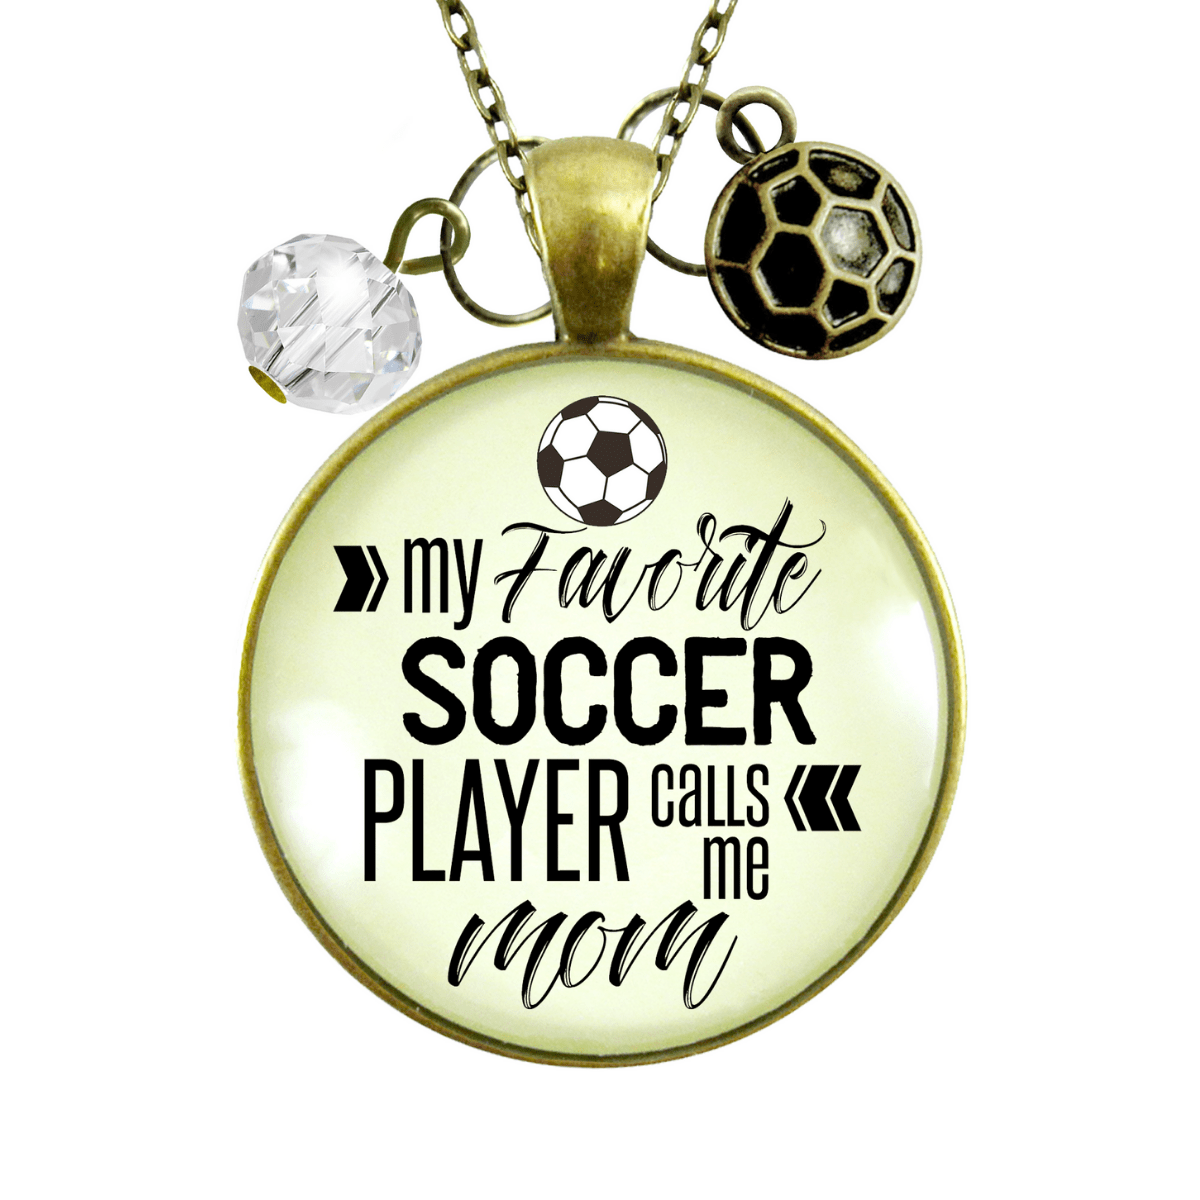 Gutsy Goodness Soccer Mom Necklace Favorite Player Calls Me Mom Kids Sports Jewelry - Gutsy Goodness Handmade Jewelry;Soccer Mom Necklace Favorite Player Calls Me Mom Kids Sports Jewelry - Gutsy Goodness Handmade Jewelry Gifts